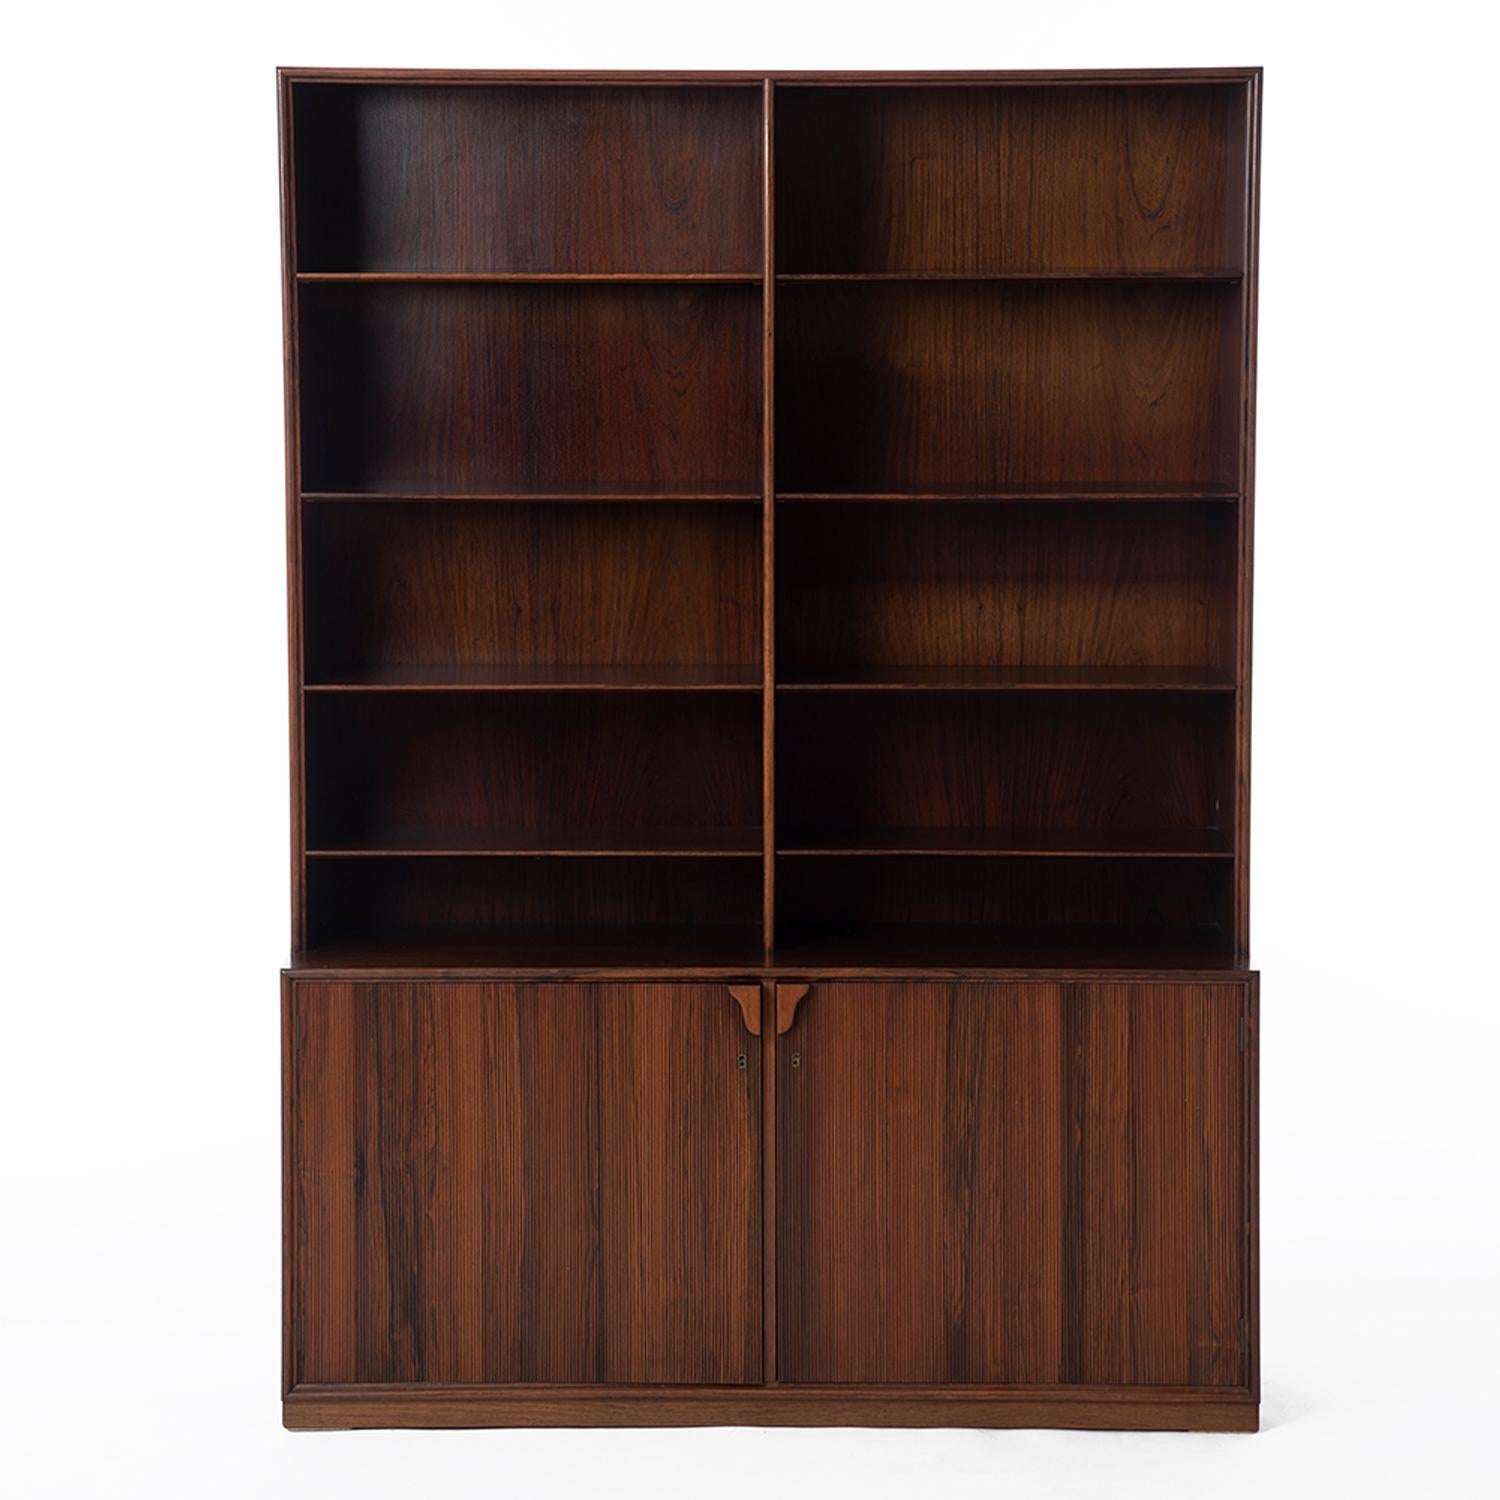 Danish modern rosewood bookcase. Adjustable shelving and lower cabinet. Design by Frode Holm.



Professional, skilled furniture restoration is an integral part of what we do every day. Our goal is to provide beautiful, functional furniture that